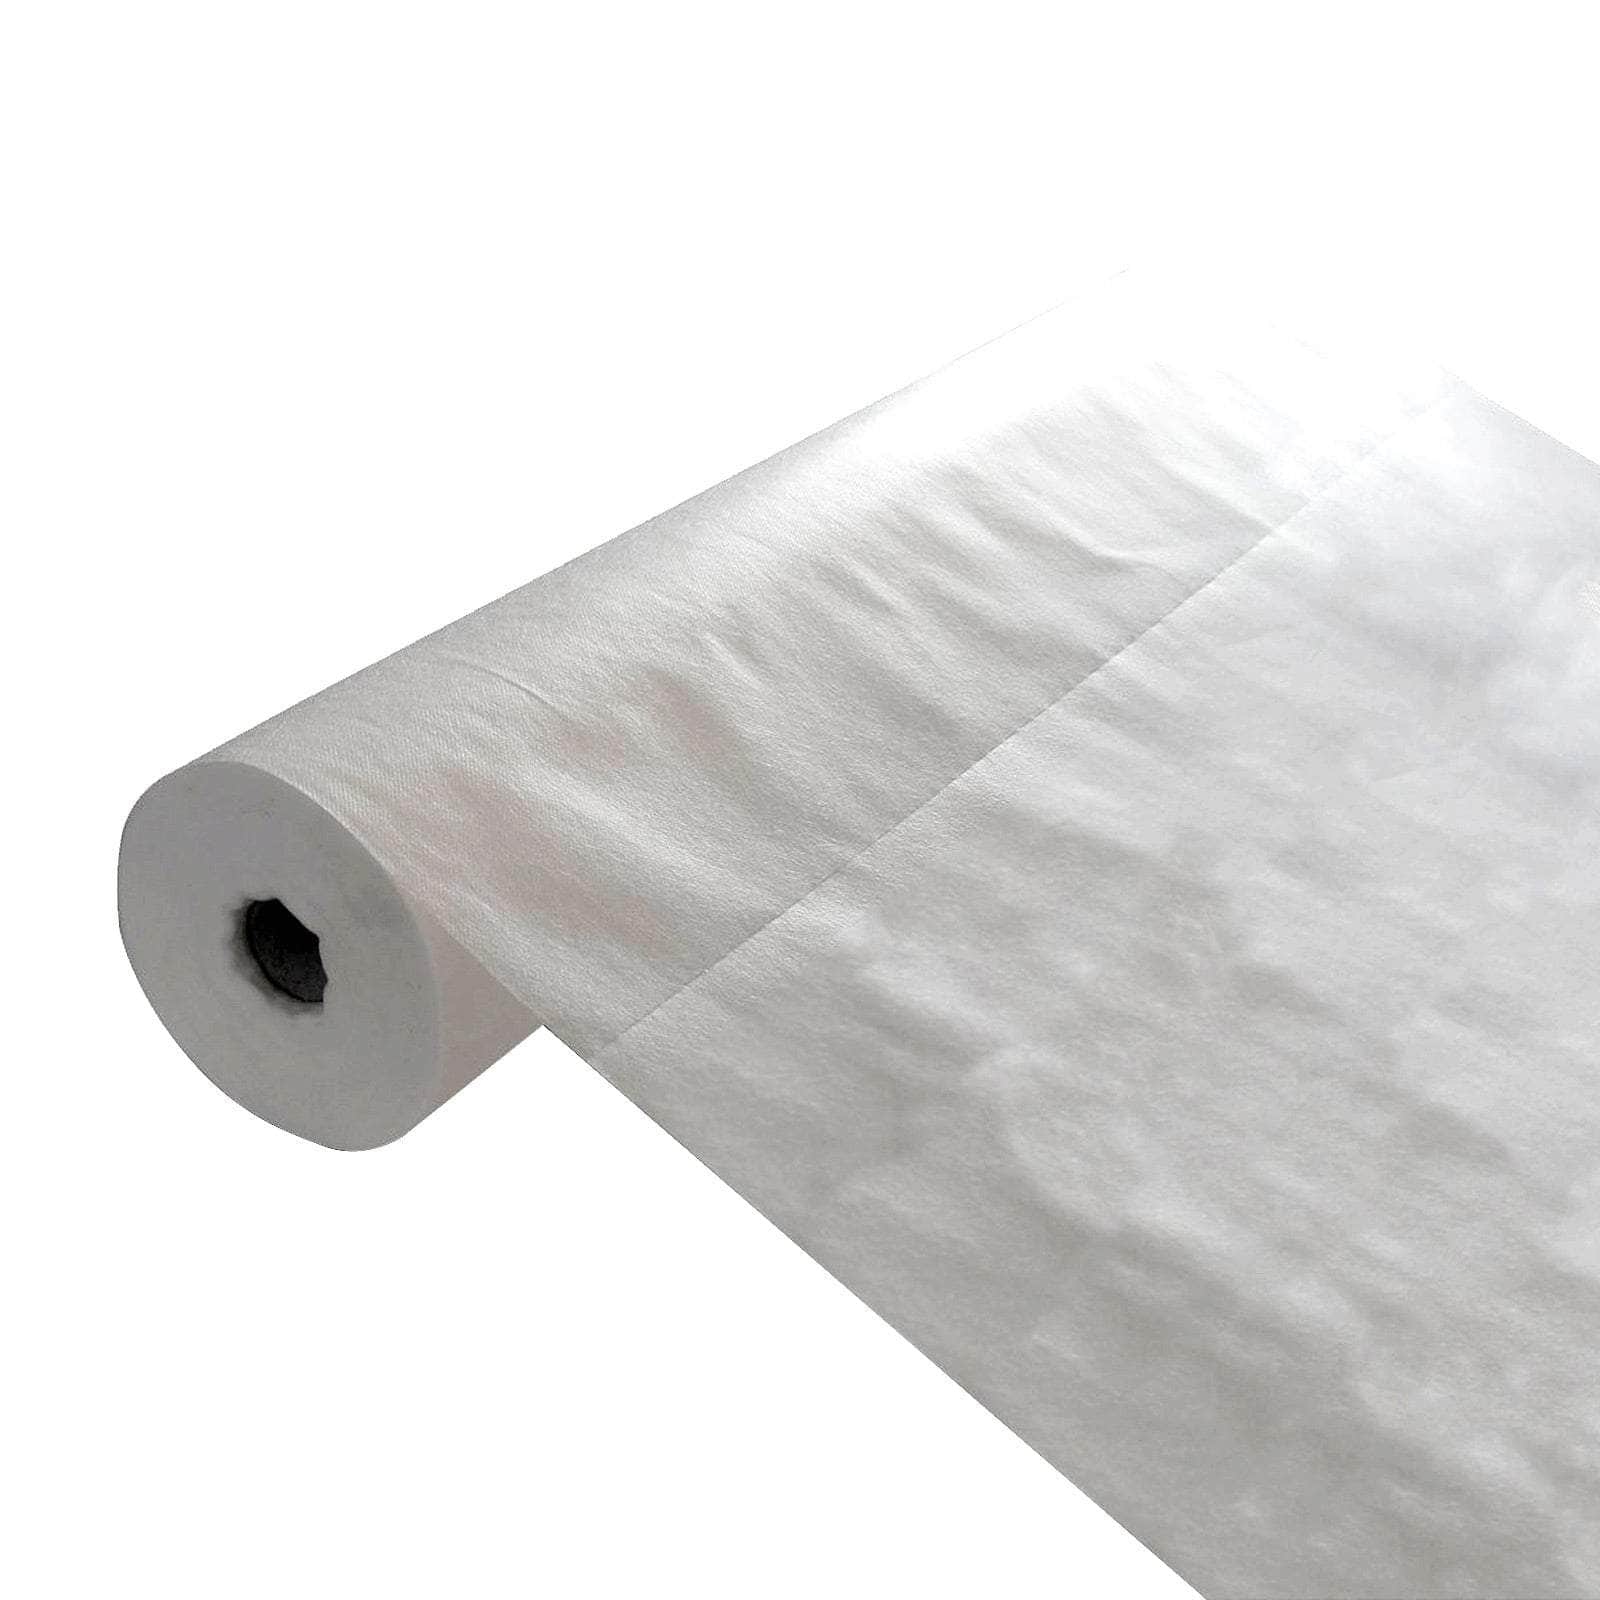 1 Roll / 45Pcs Disposable Massage Table Sheet Cover